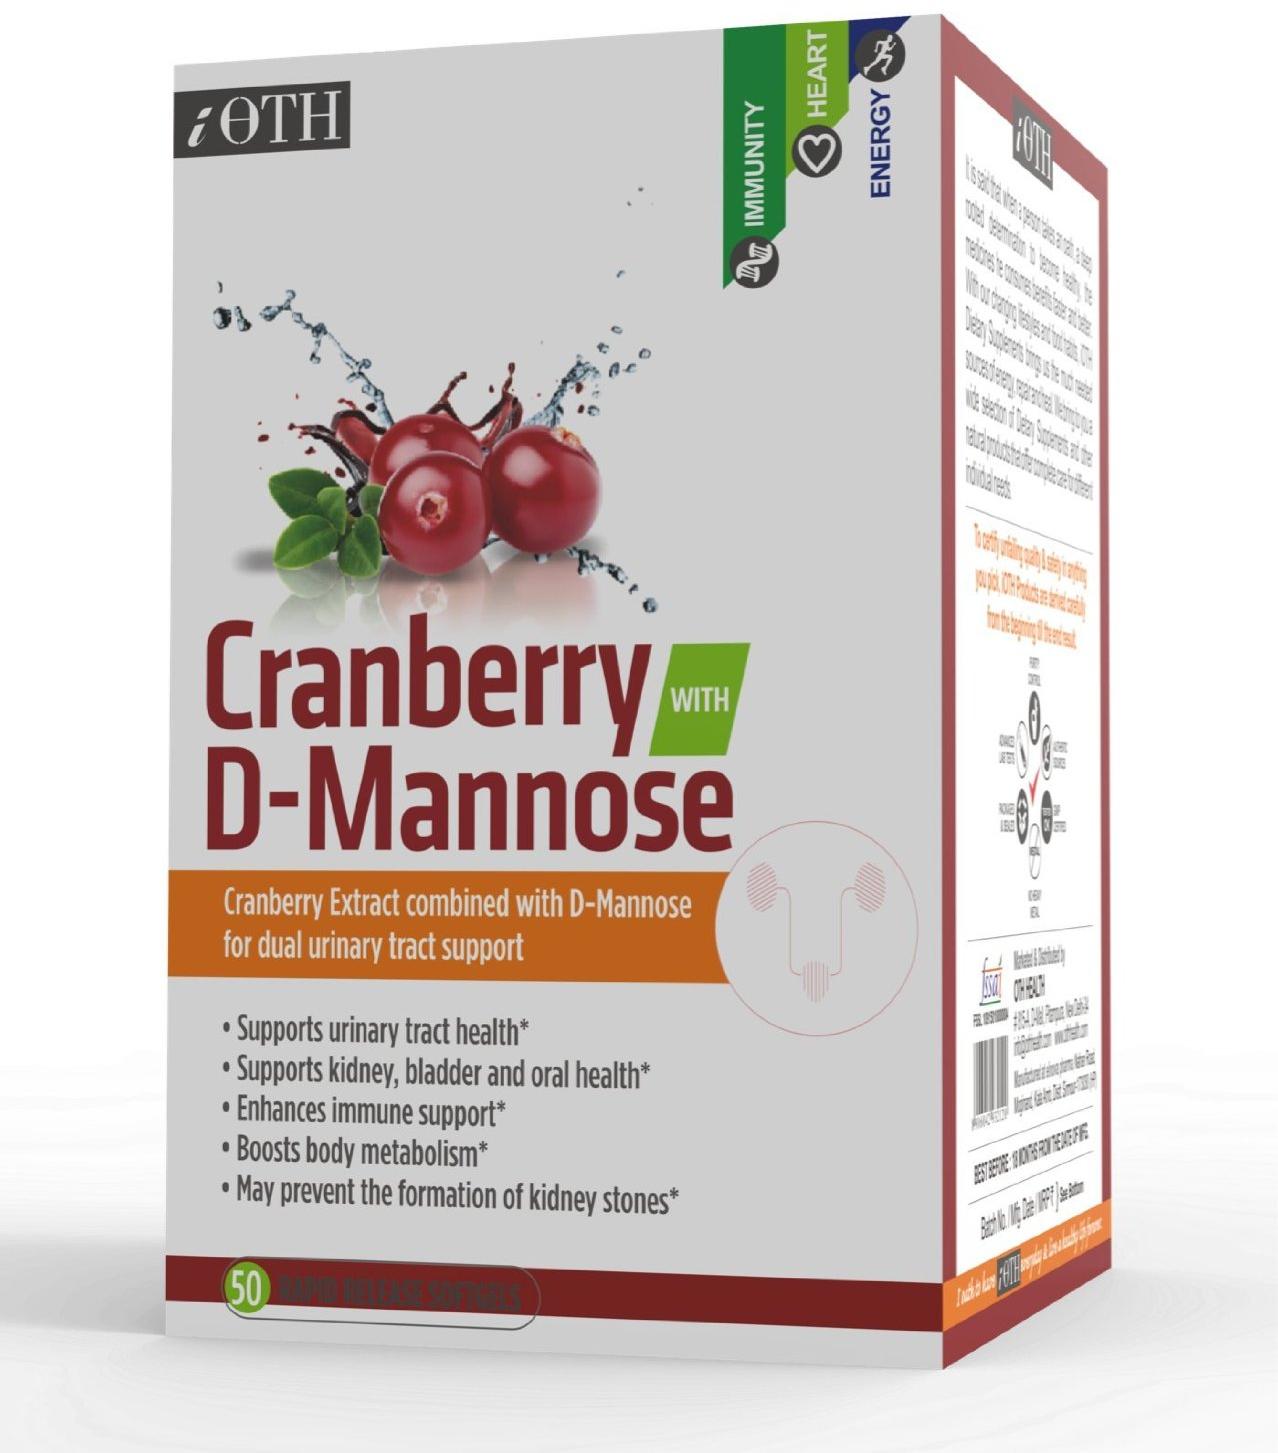 IOTH Cranberry with D-Mannose, Grade : Pharmaceutical